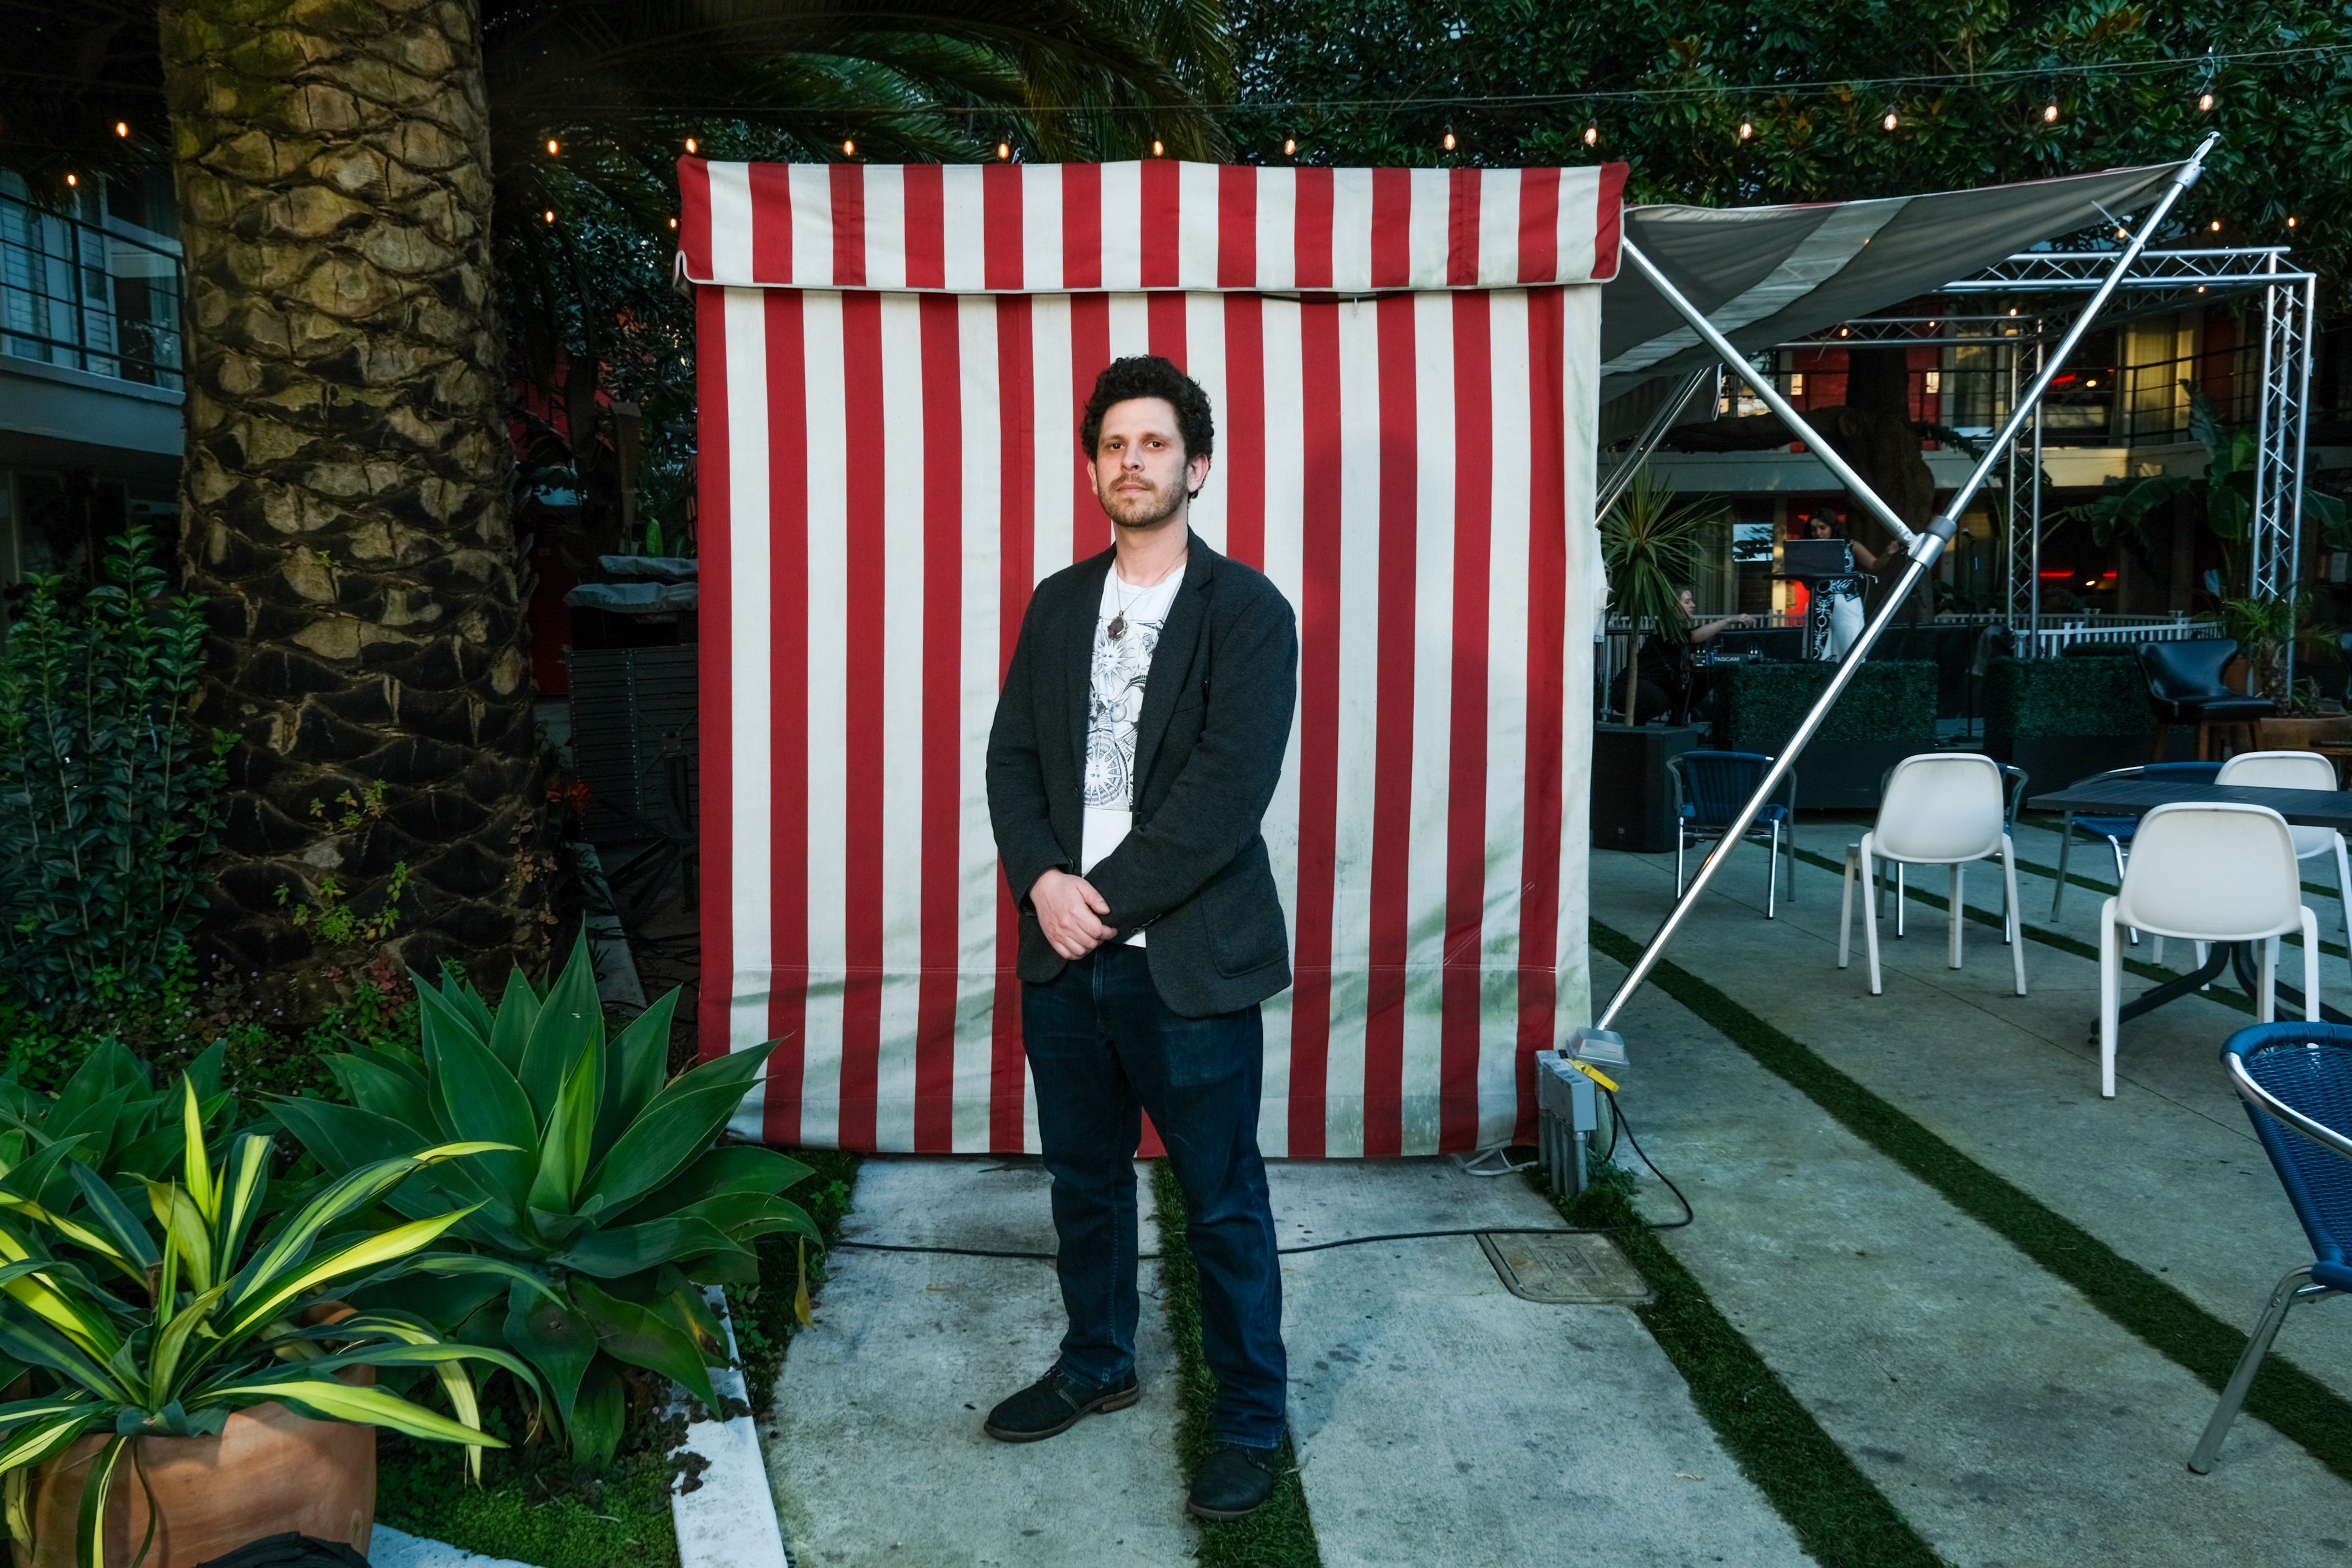 A man stands in front of a red and white striped backdrop outside with plants and chairs around.